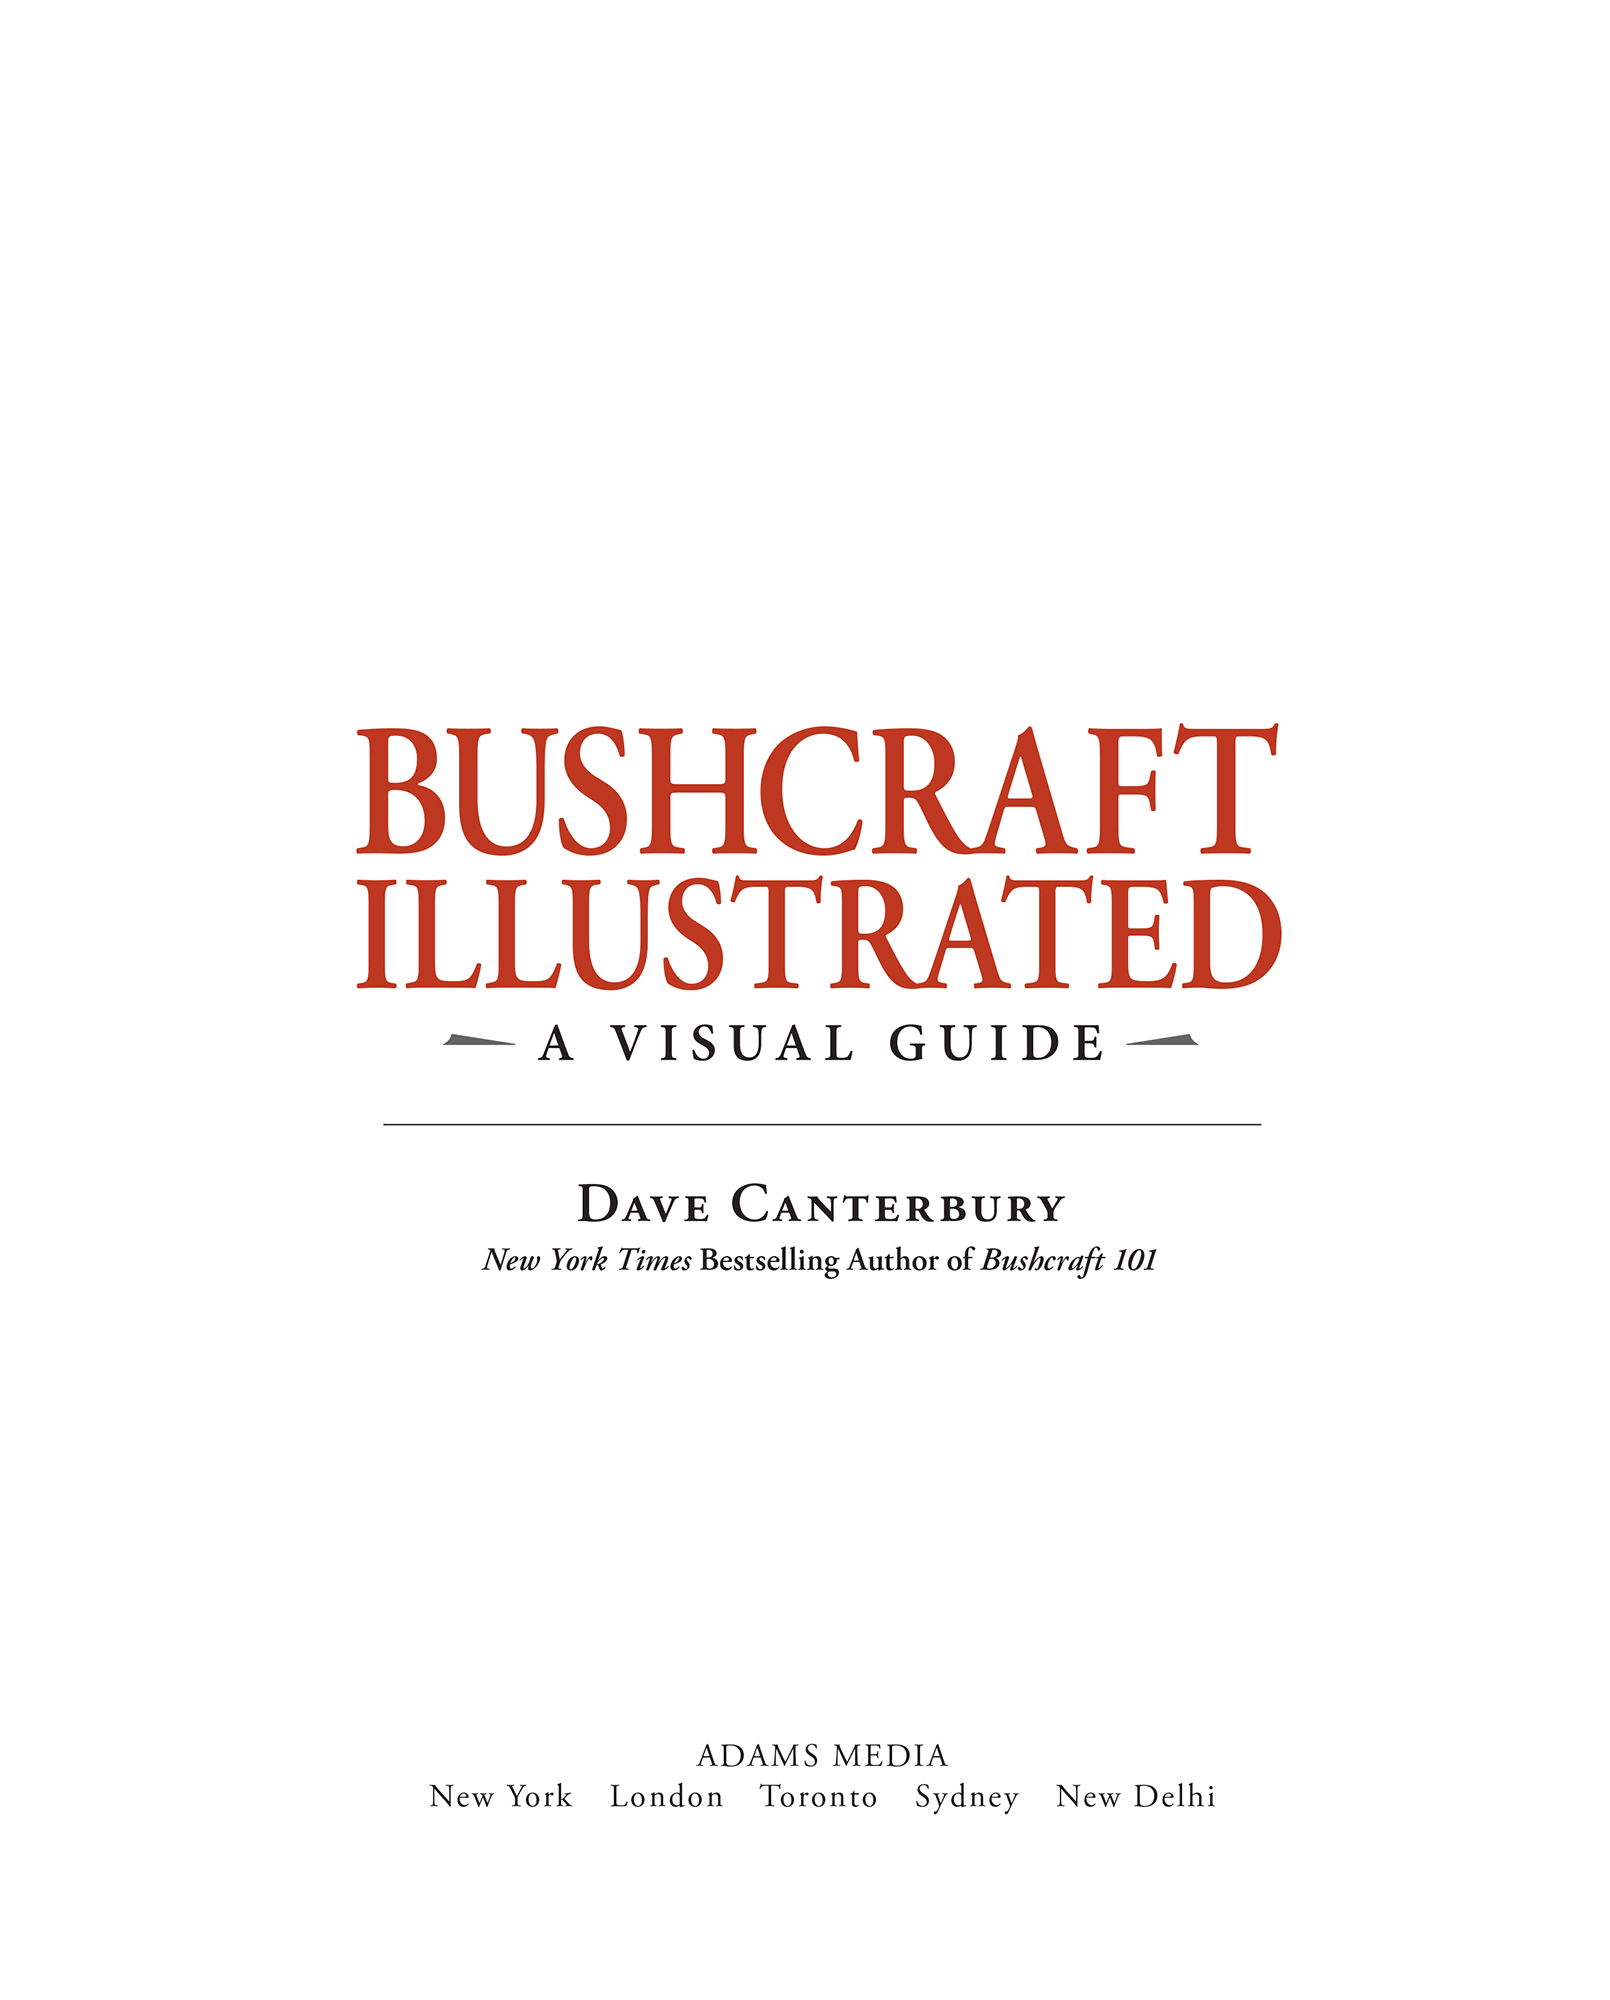 Bushcraft illustrated a visual guide - image 2